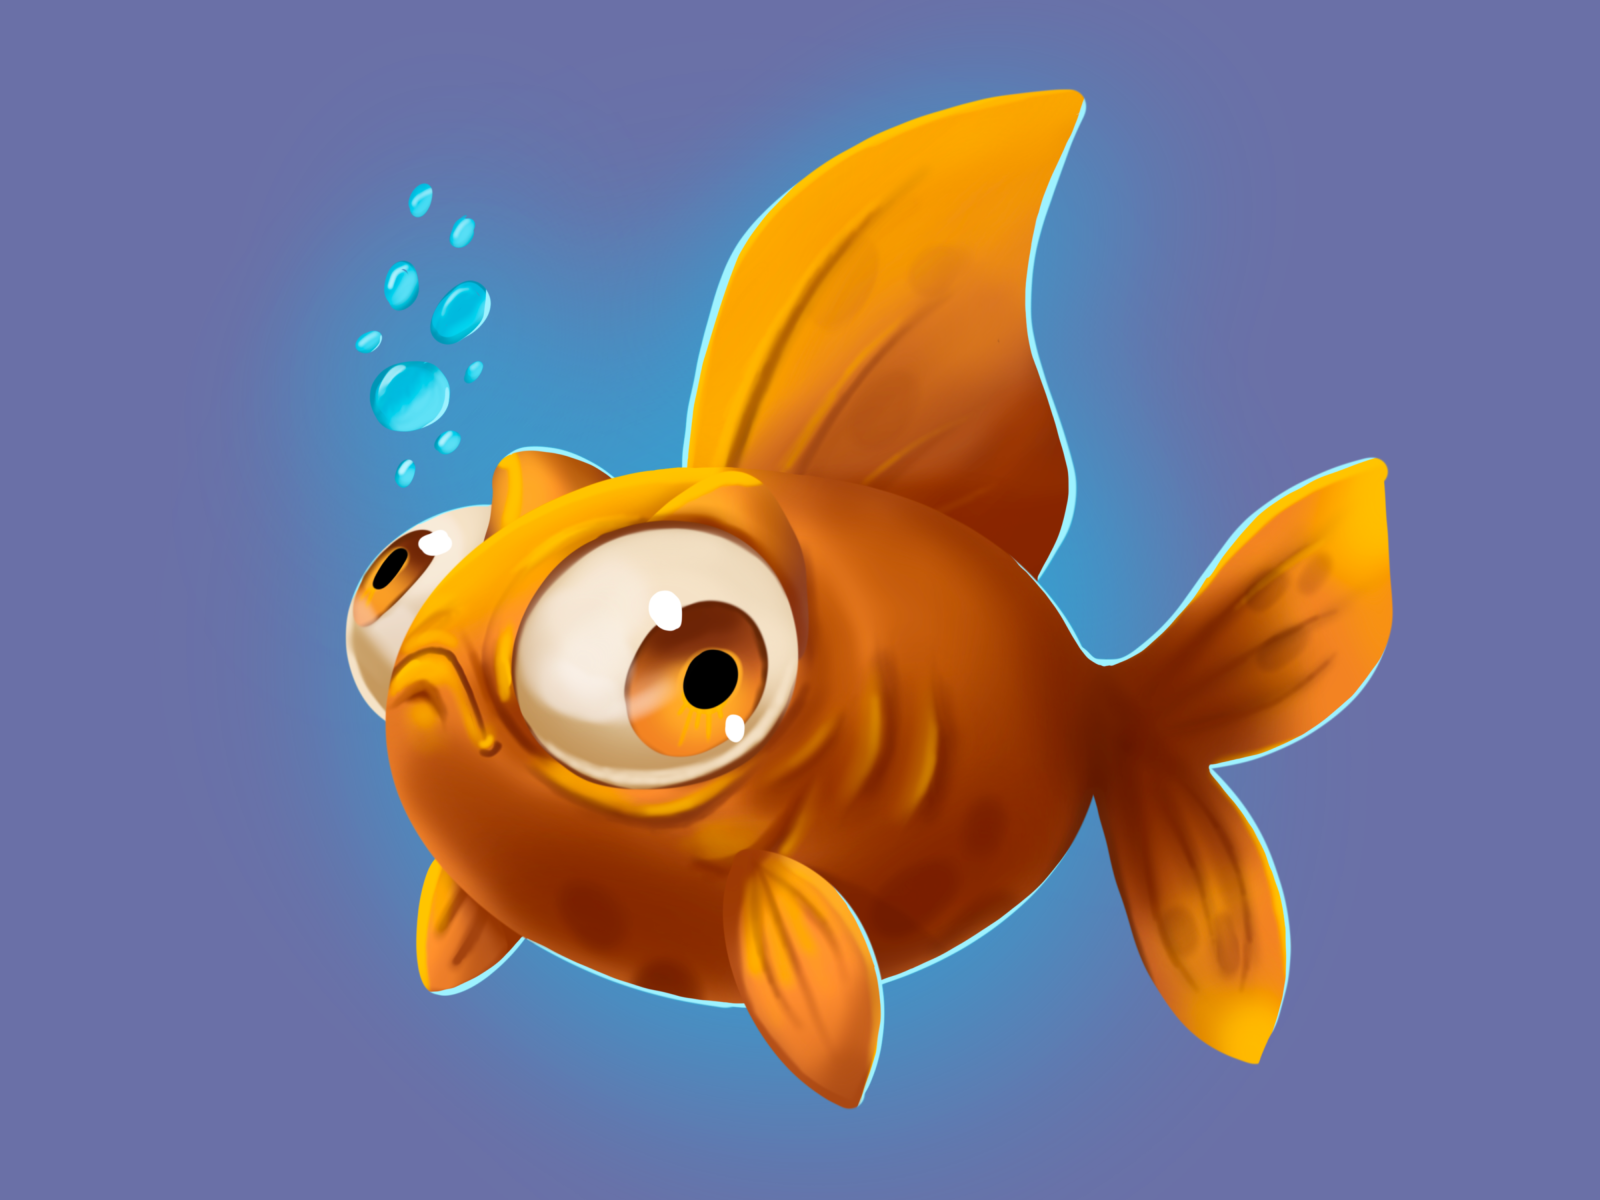 Golden Fish by Yulia on Dribbble